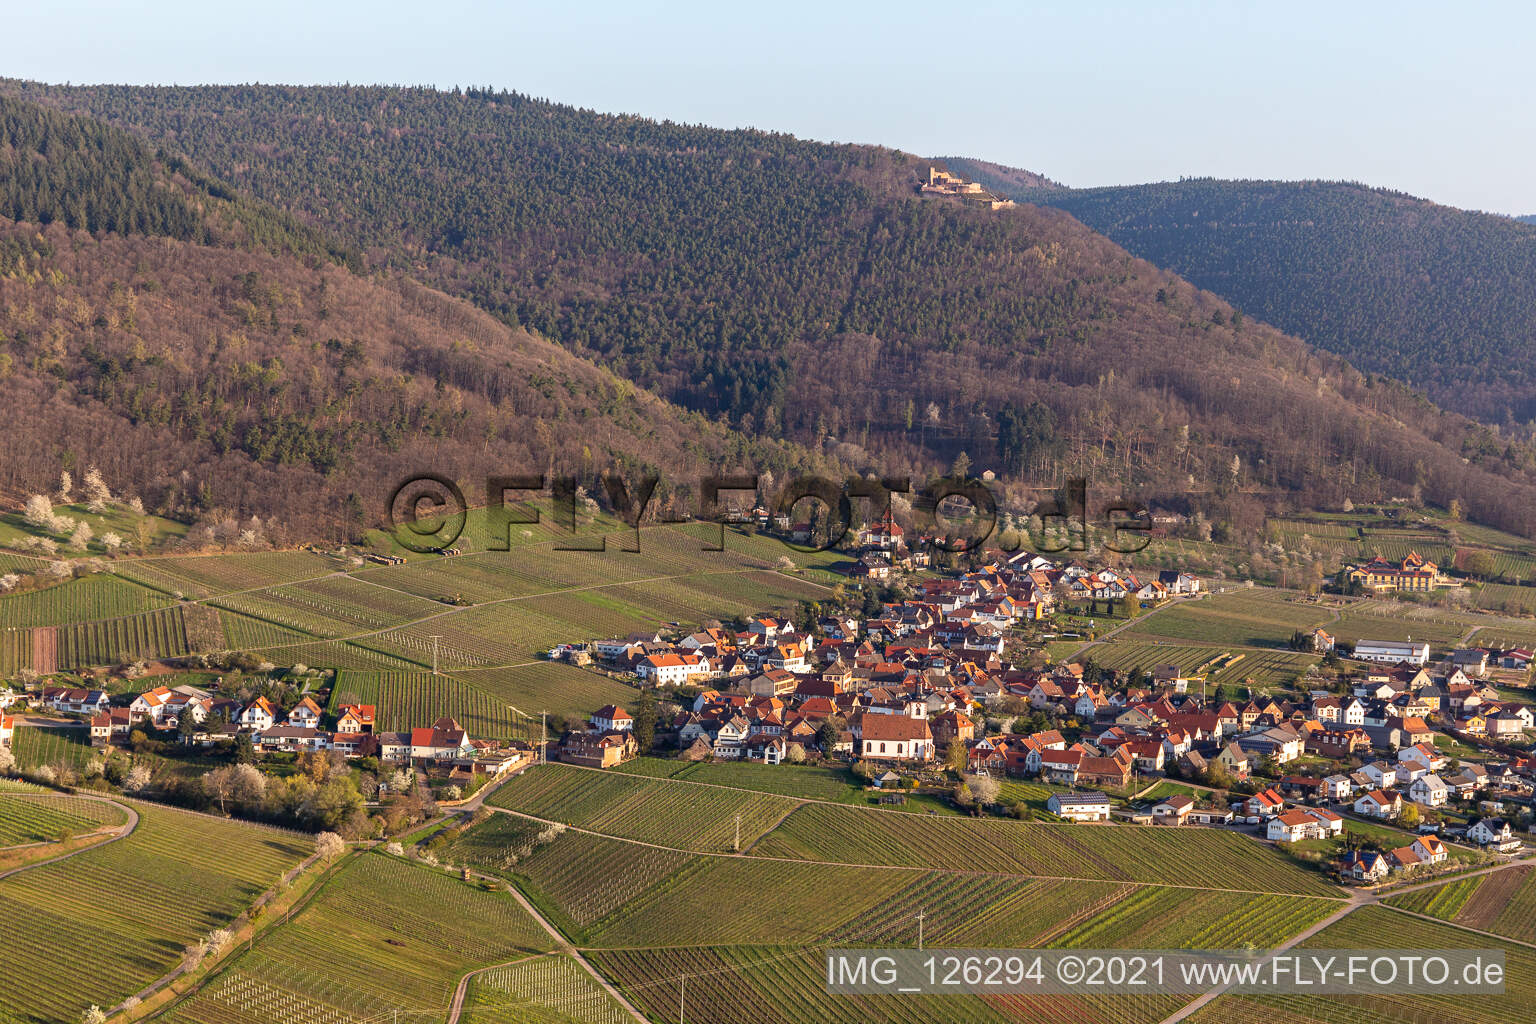 Weyher in der Pfalz in the state Rhineland-Palatinate, Germany from the drone perspective